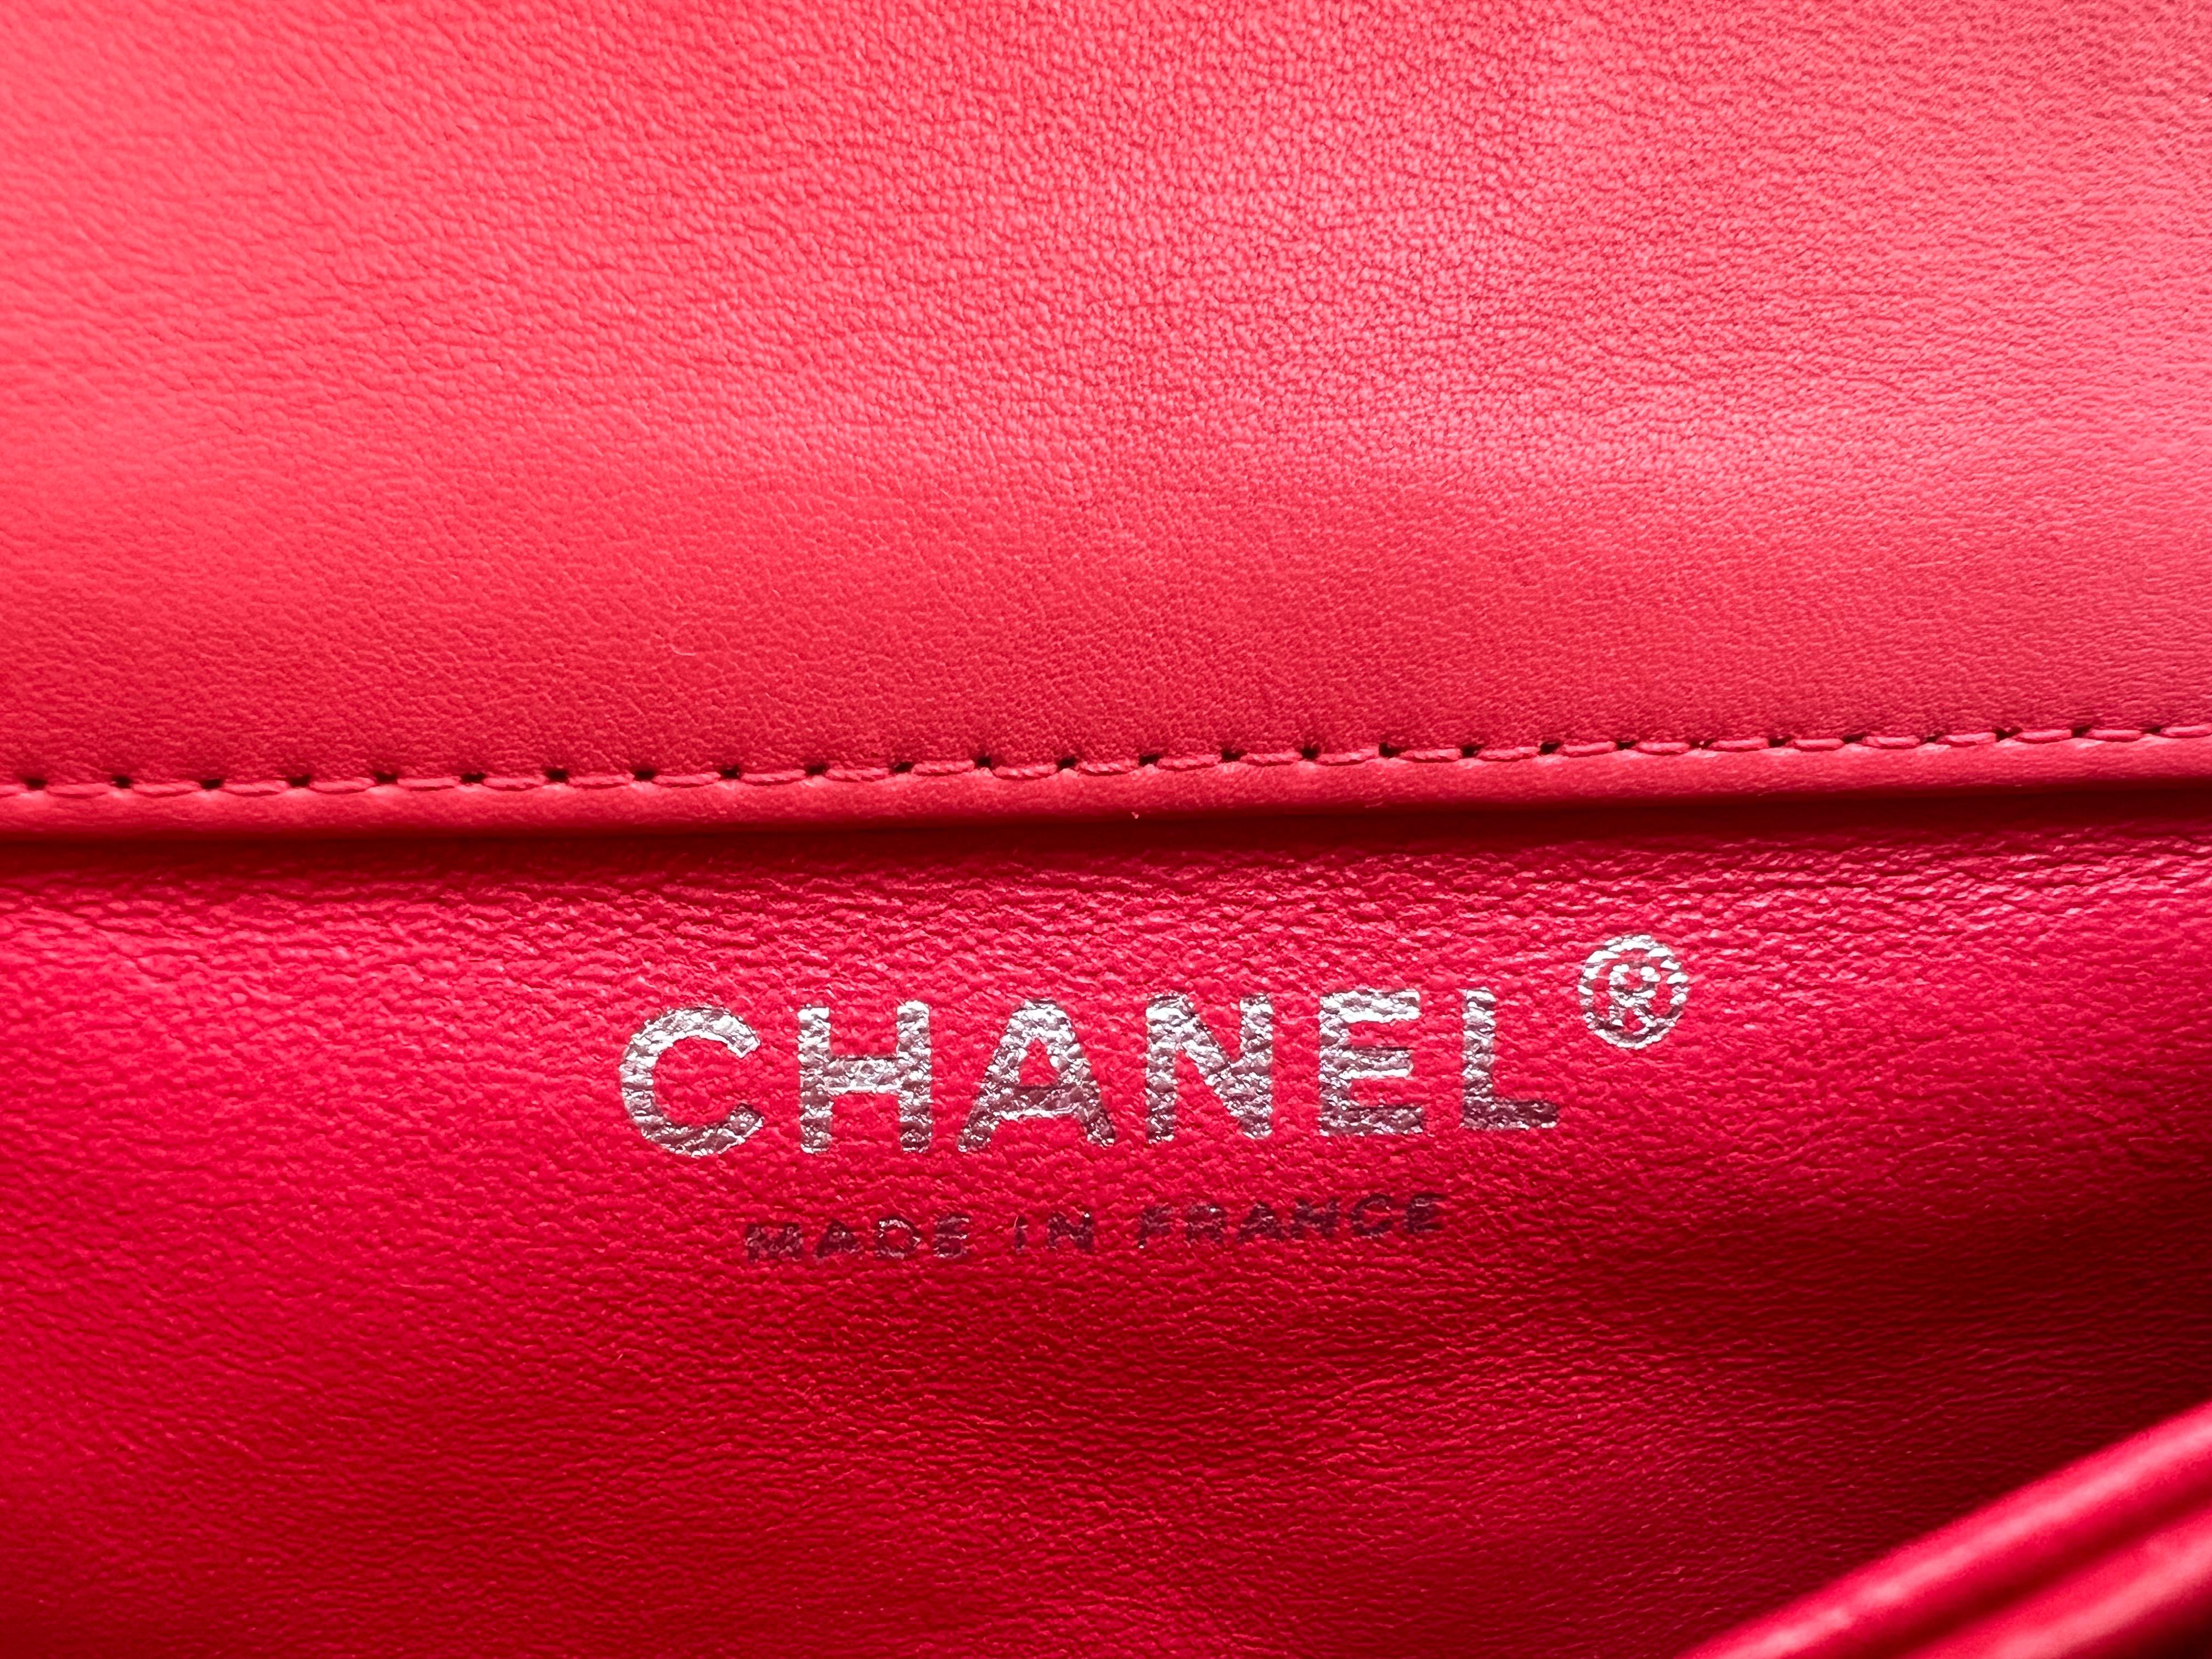 The Chanel Mini Flap in patent leather is a coveted accessory that embodies the timeless elegance and luxury associated with the Chanel brand. In a vibrant coral color and adorned with silver hardware, this particular variation exudes a bold and